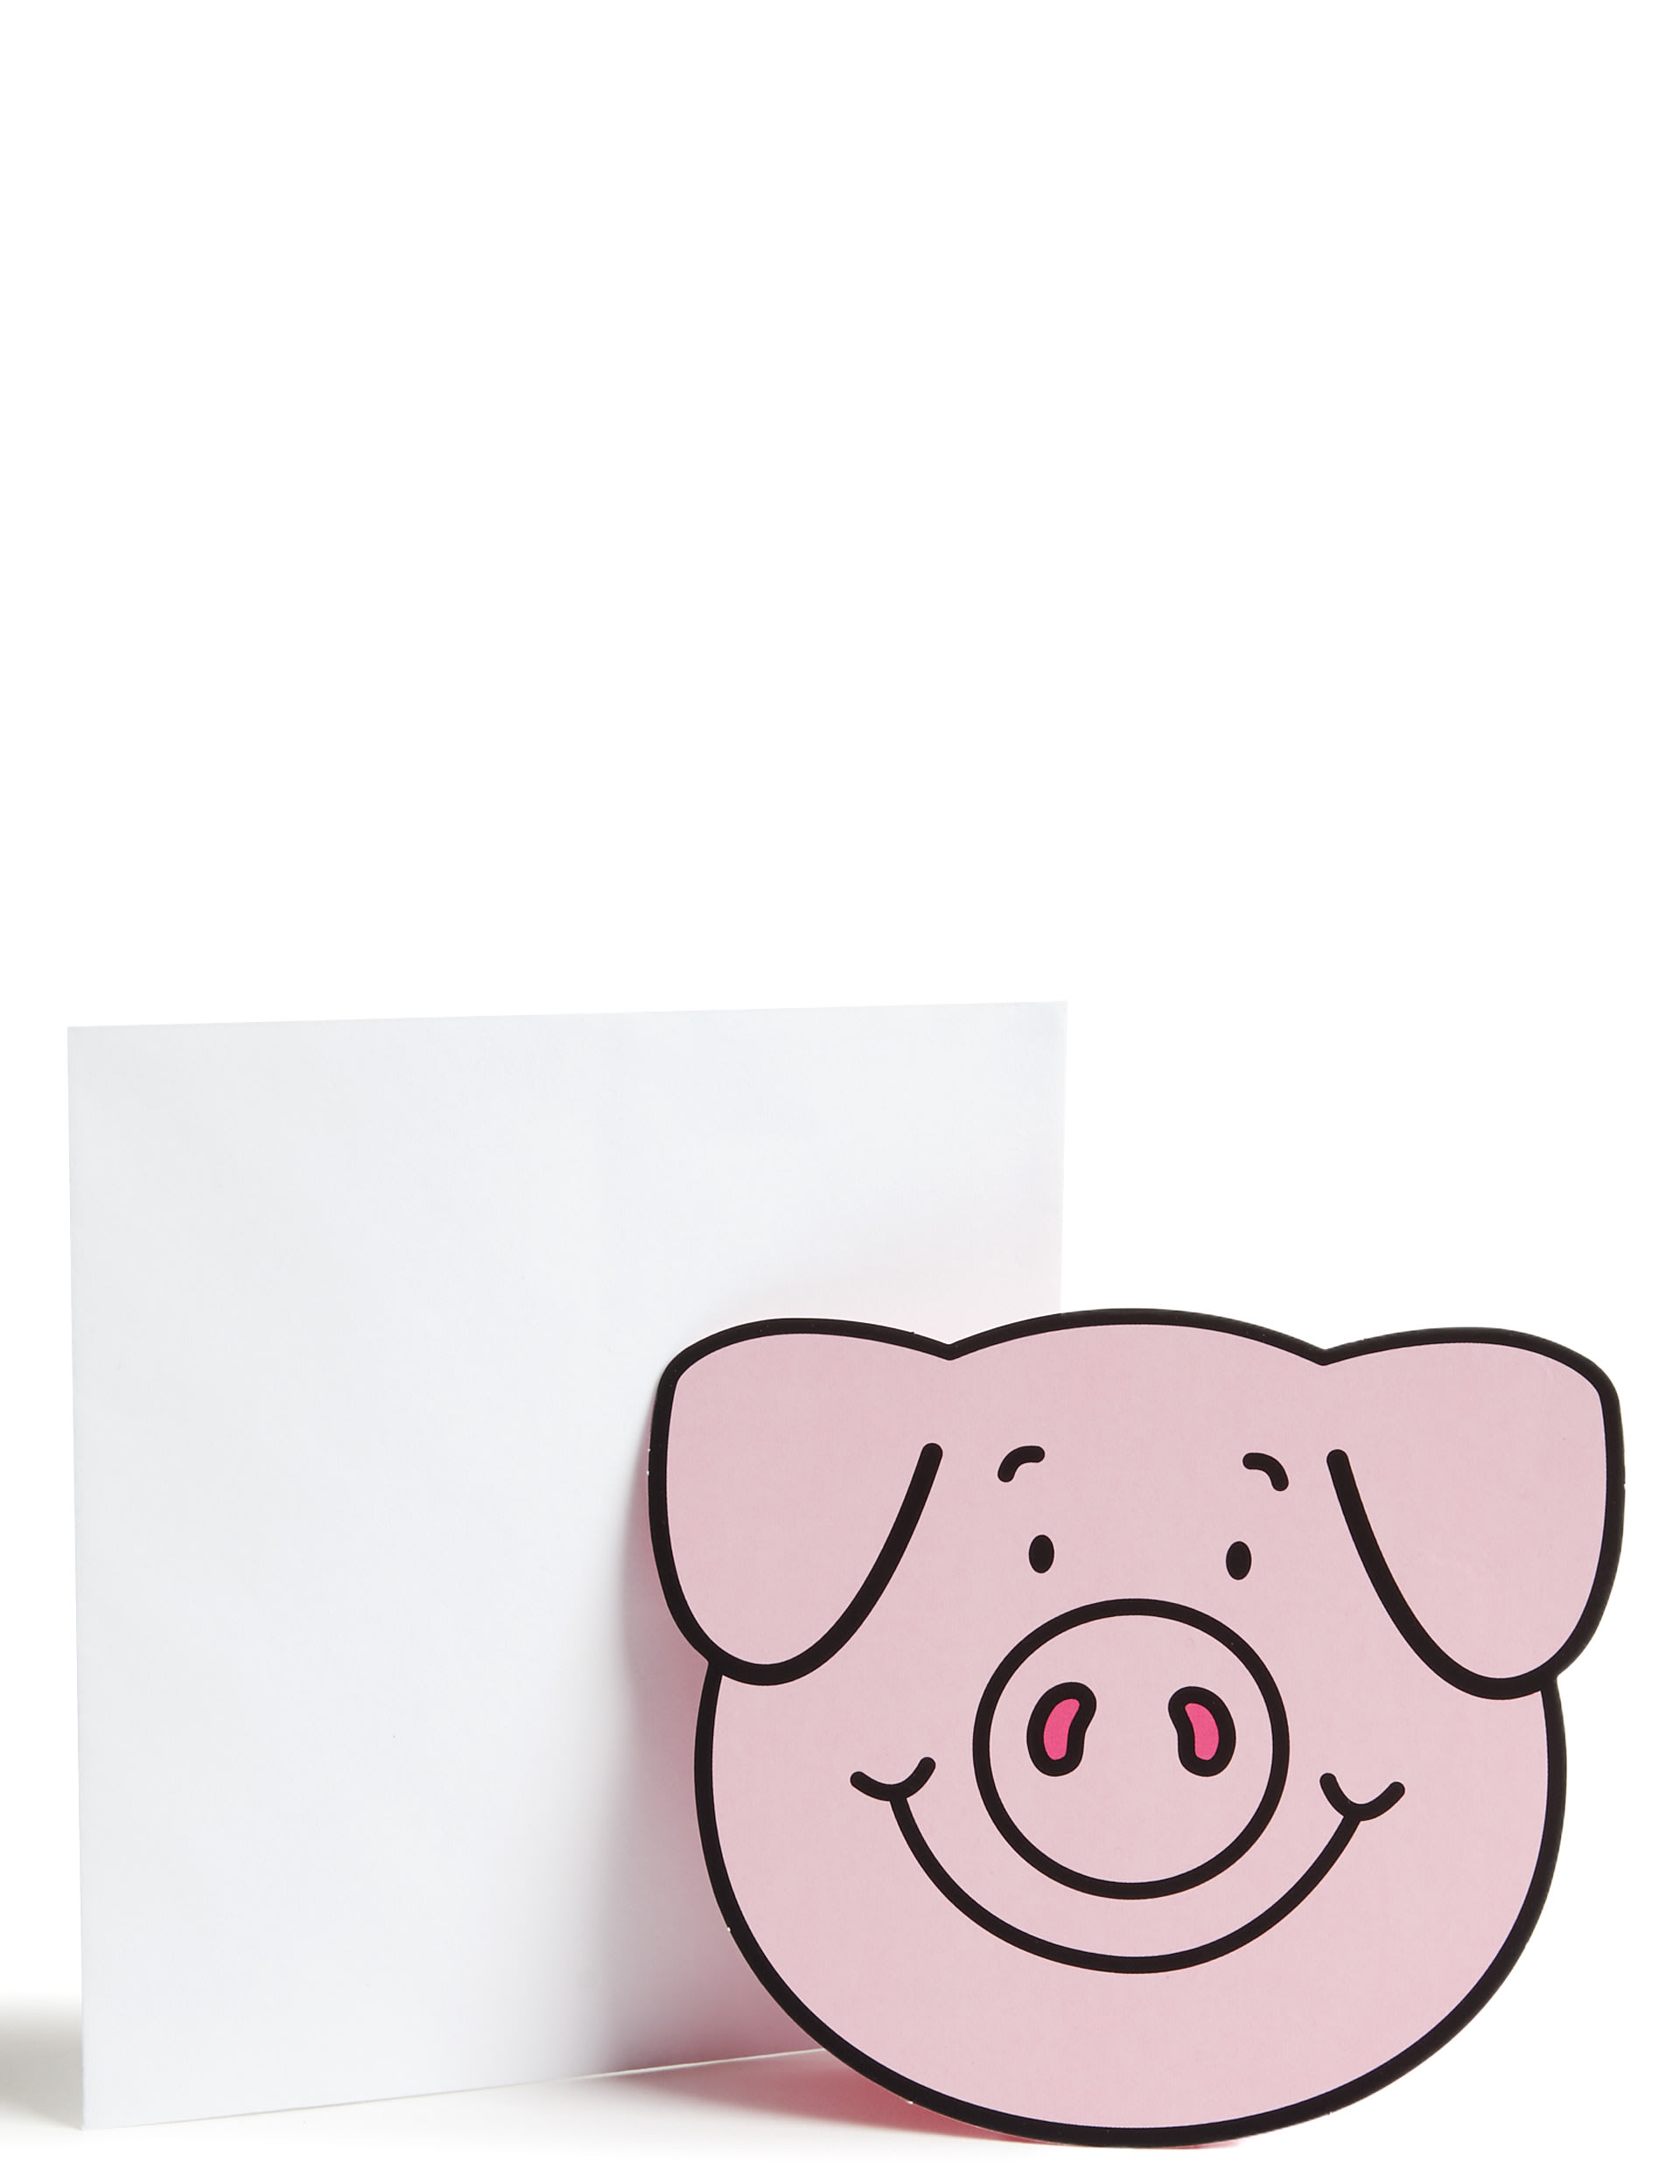 Percy Pig™ Gift Card 2 of 4